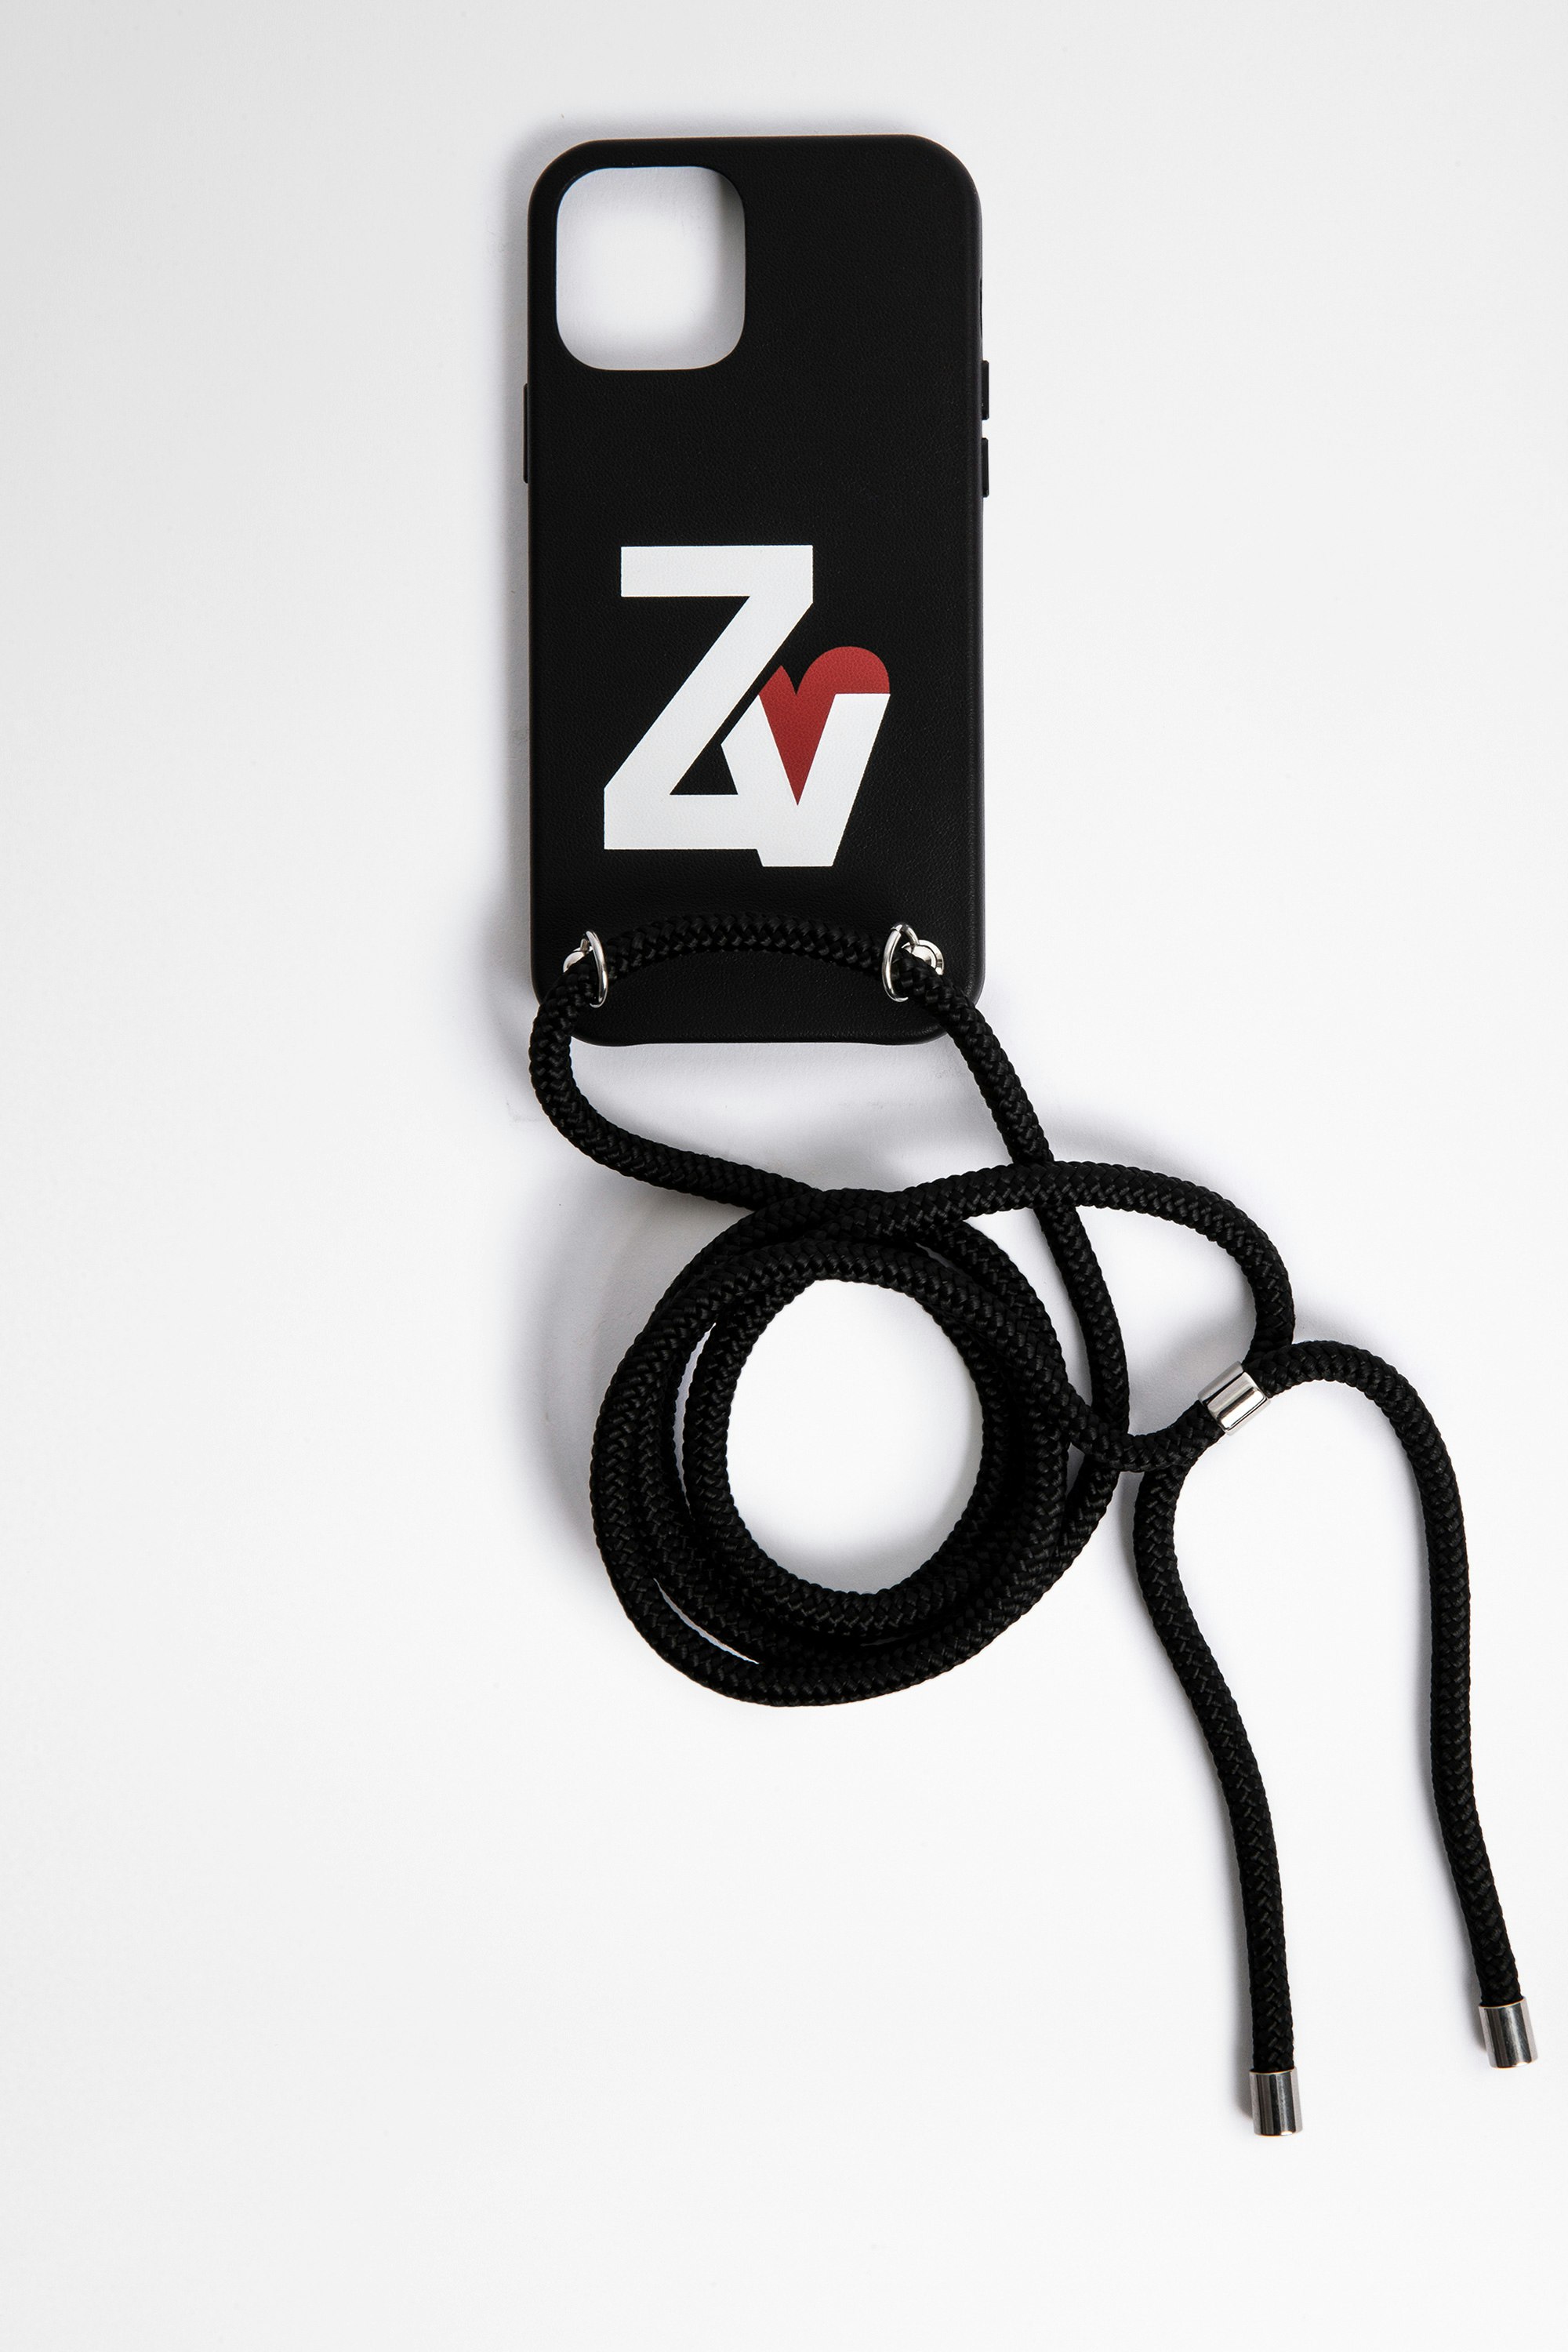 ZV Crush Rope iPhone 12 ケース iPhone 12 case with shoulder strap in black